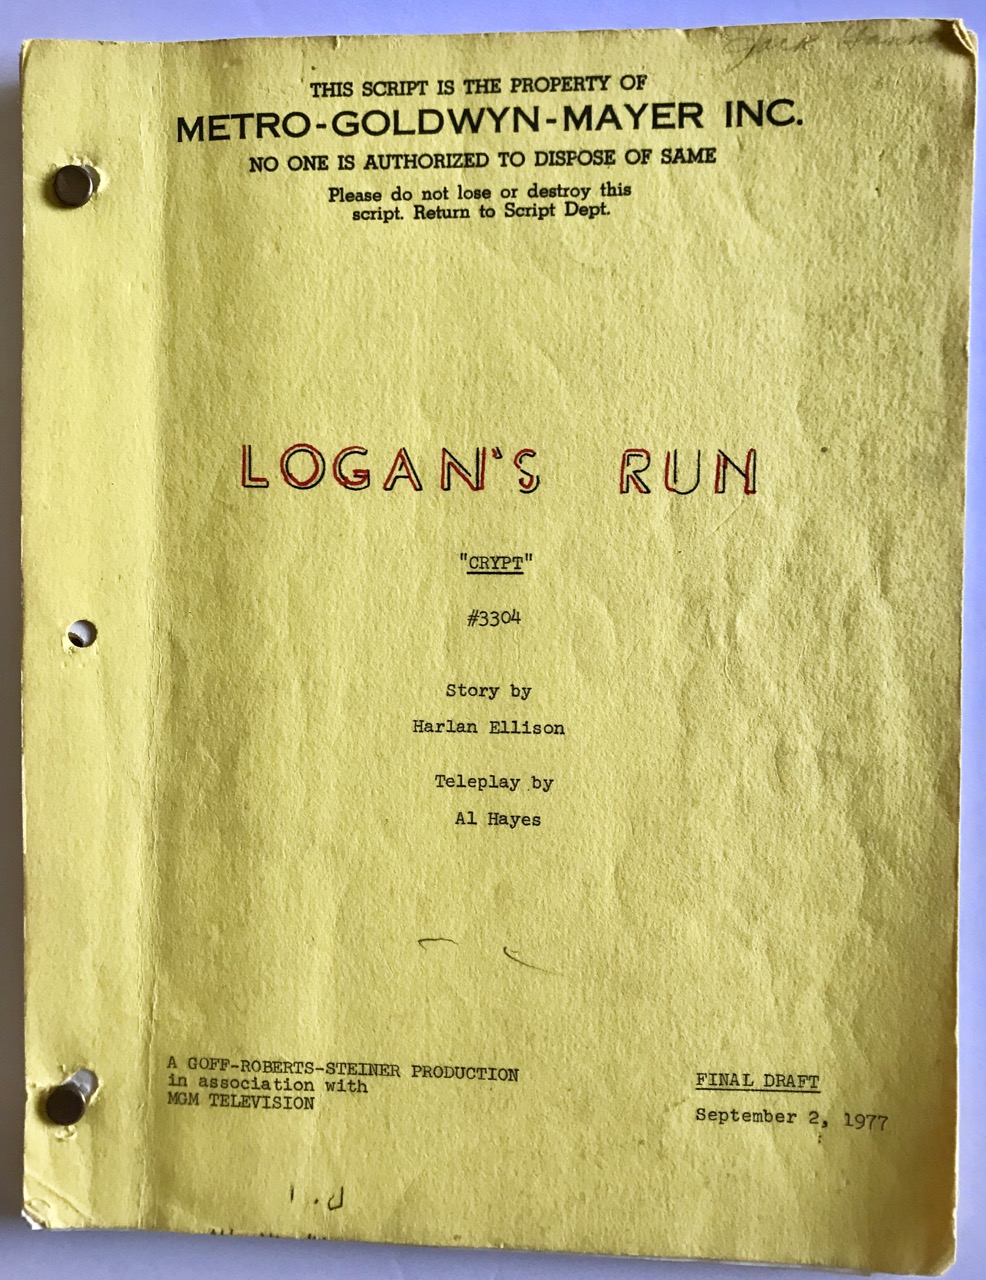 Image for Original Teleplay/ Script for the television series Logan’s Run:  “Crypt” [1977]
With extensive editing annotations by script supervisor Jack Gannon.
